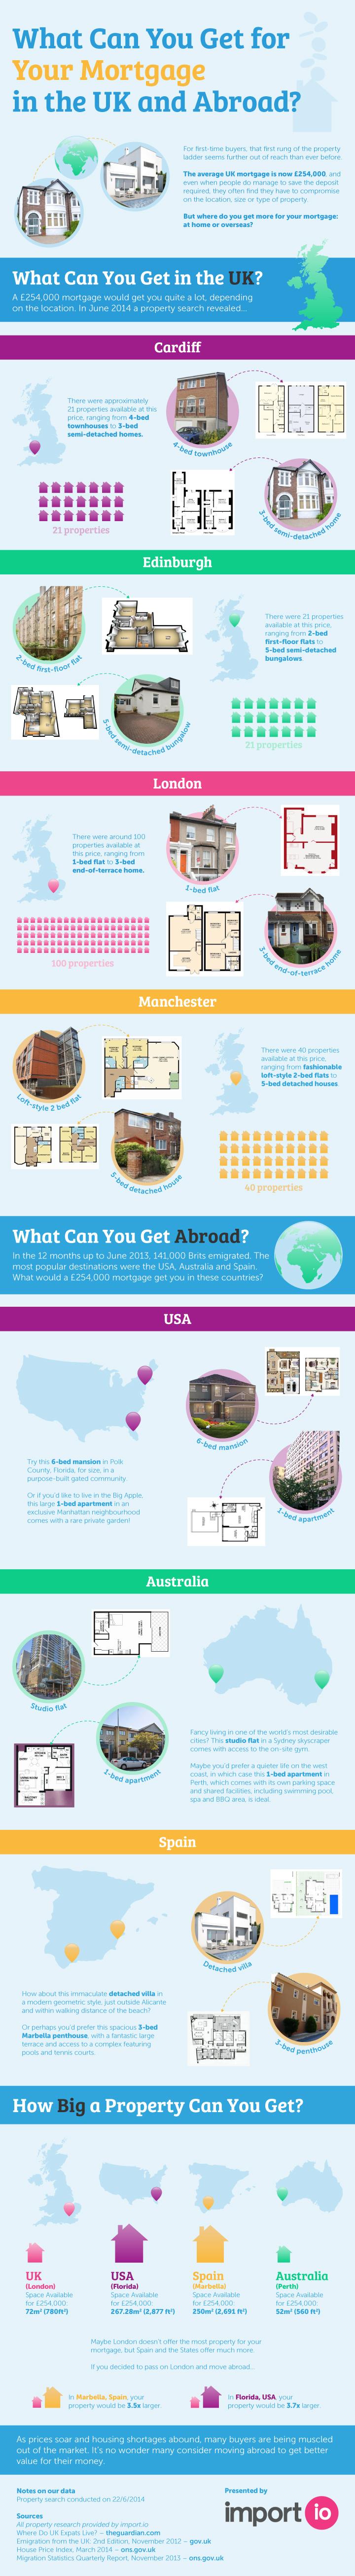 What can you get for your mortgage globally